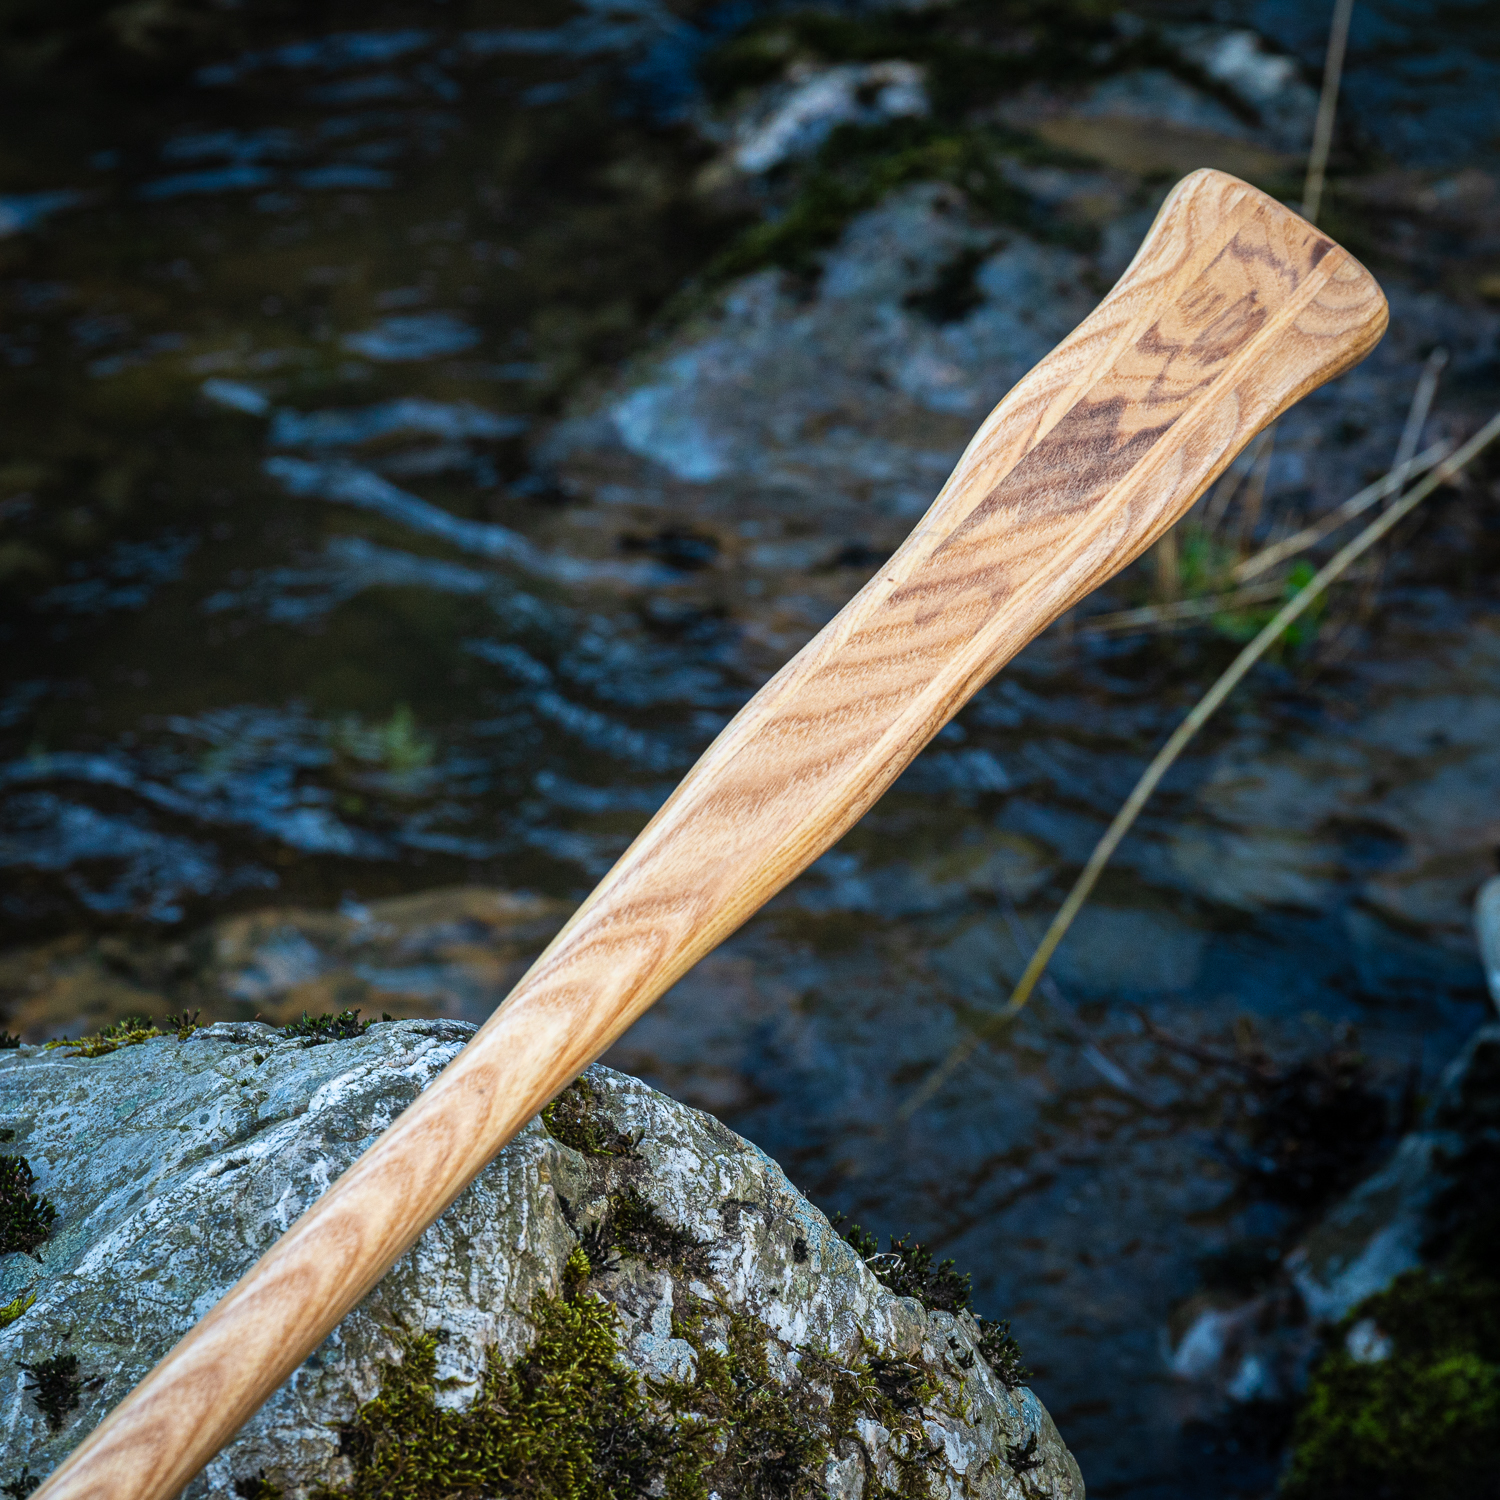 The North Woods paddle grip